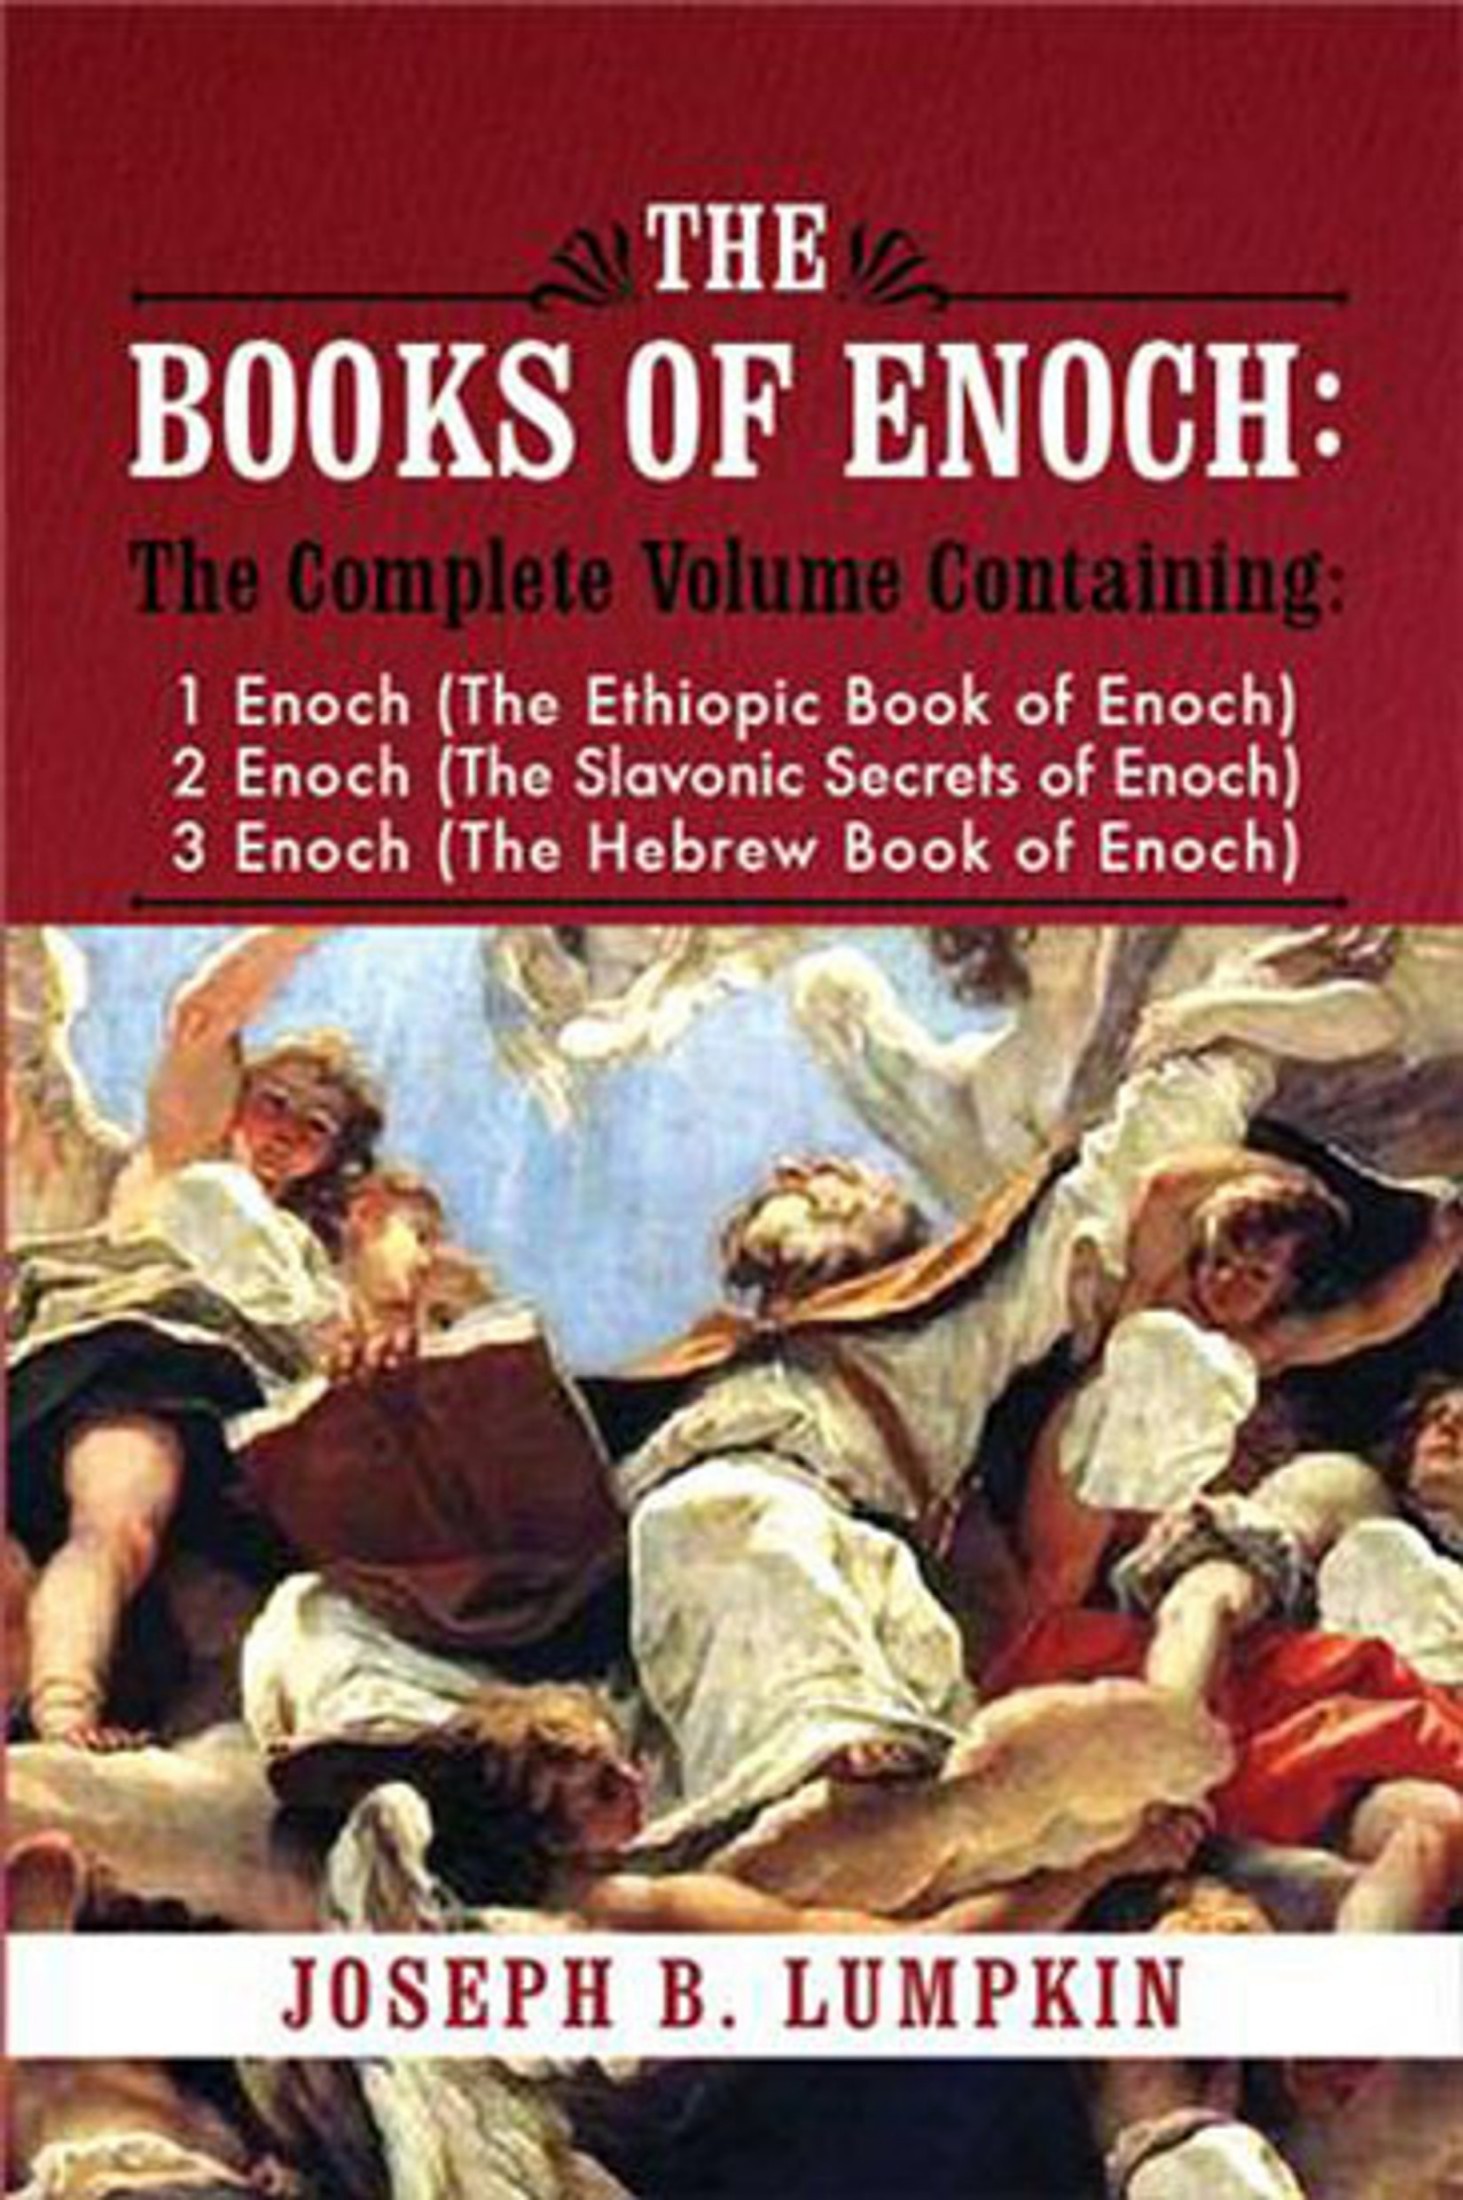 The Books of Enoch: A Complete Volume Containing 1 Enoch (The Ethiopic Book of Enoch), 2 Enoch (The Slavonic Secrets of Enoch), and 3 Enoch (The Hebrew Book of Enoch